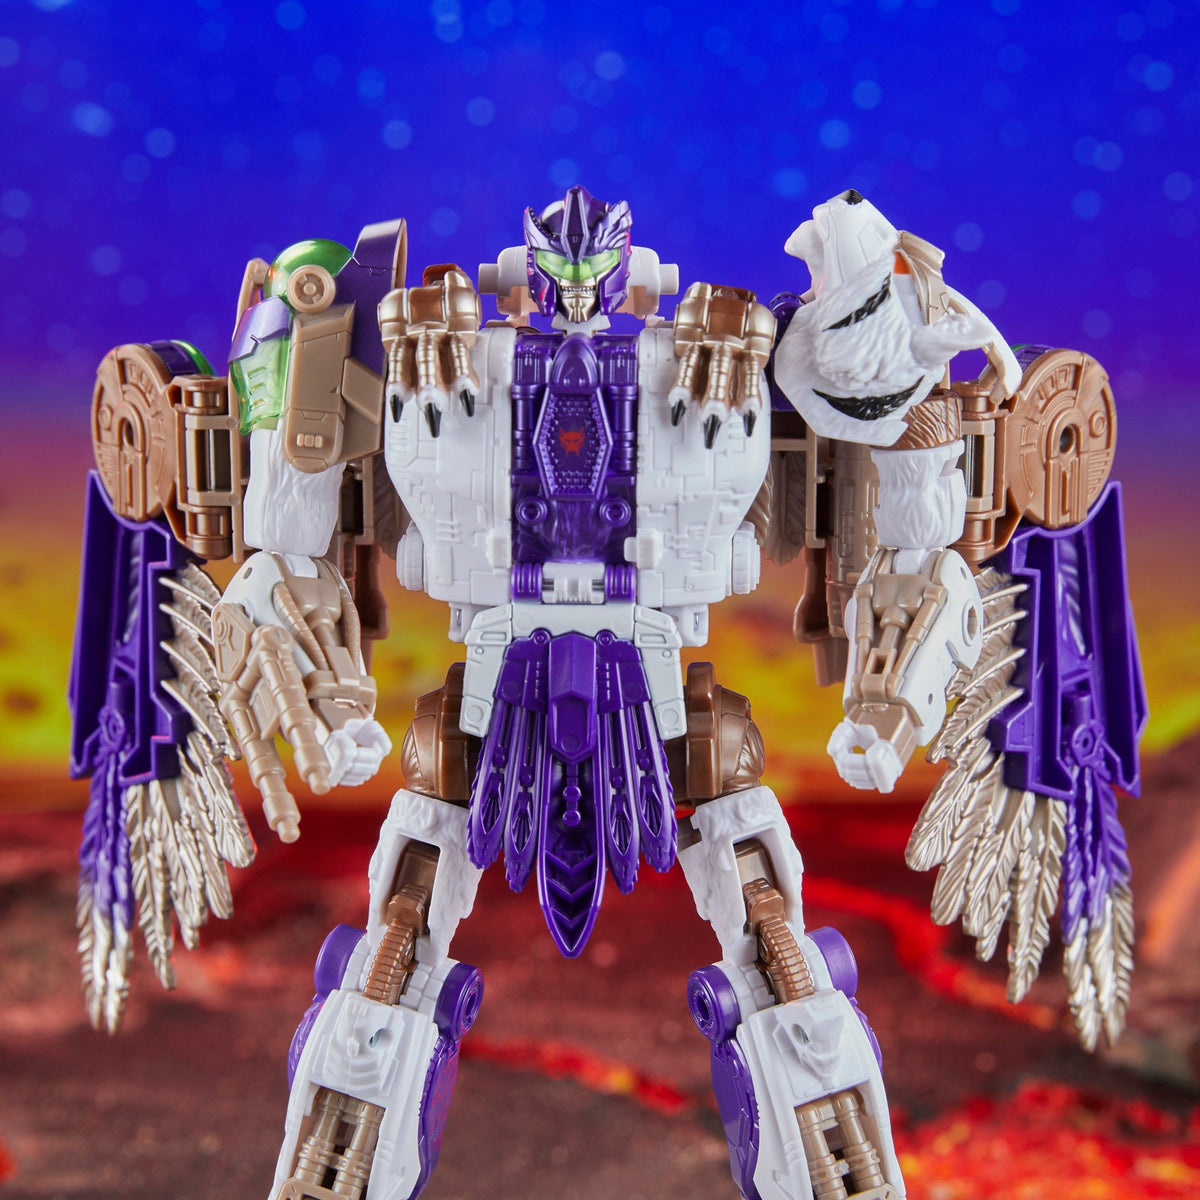 Transformers Legacy United Leader Class Beast Wars Universe